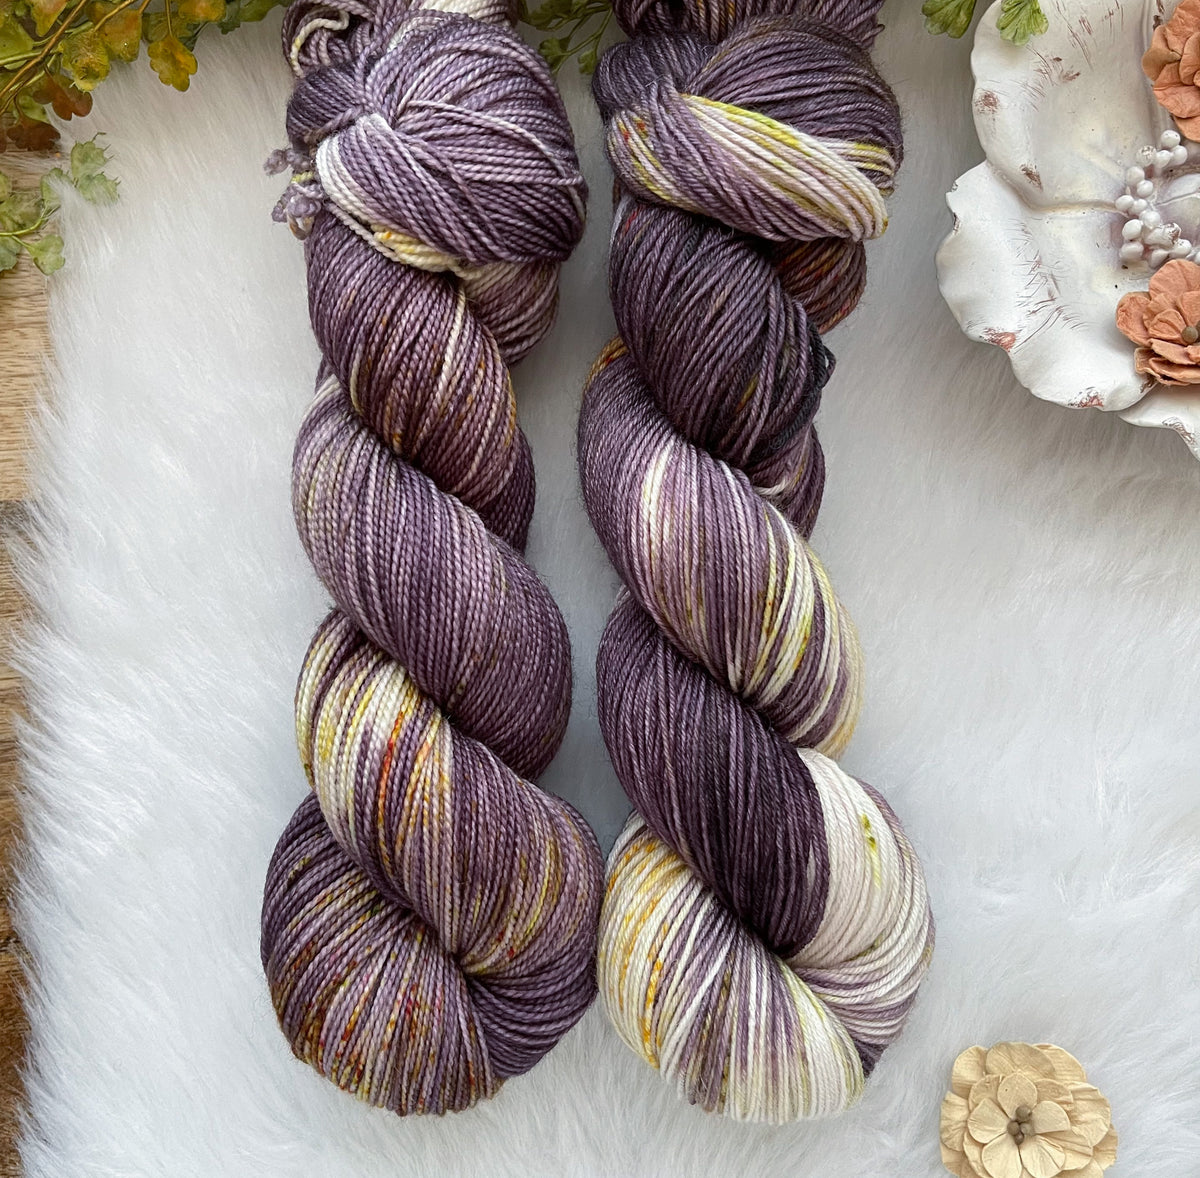 OLD FASHIONED ROMANCE -Dyed to Order - Hand Dyed Yarn Skein